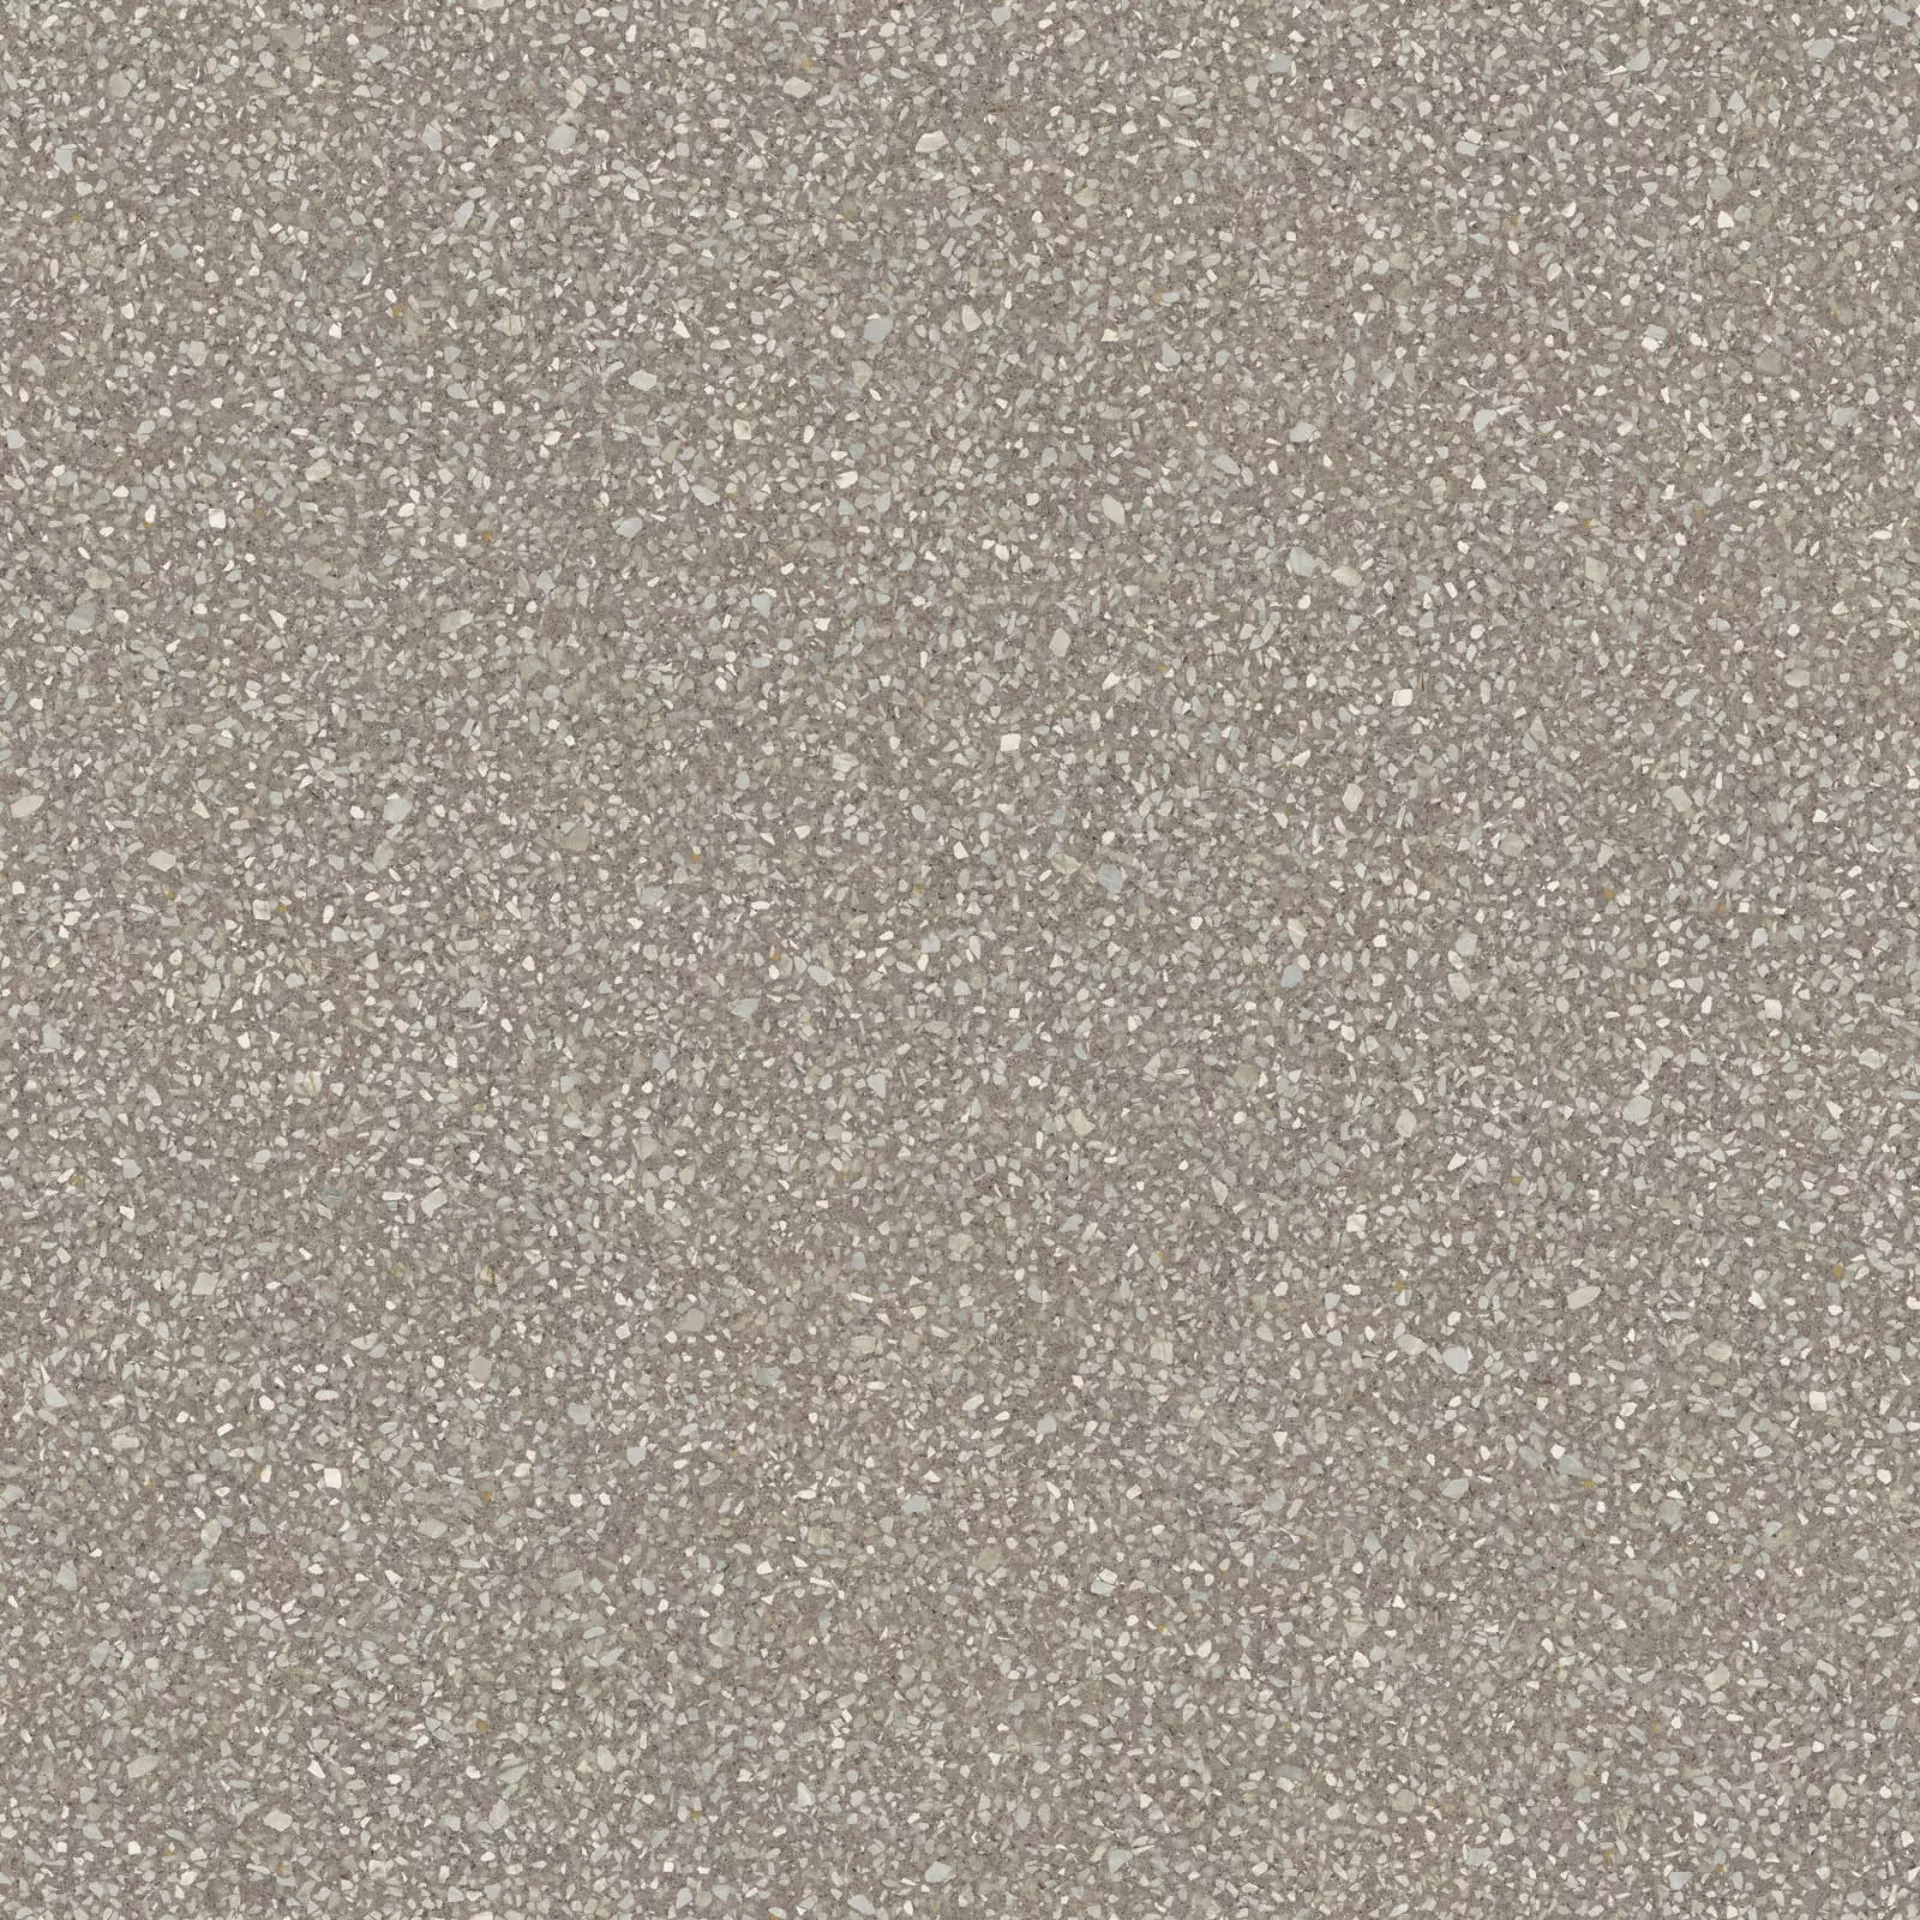 ABK Blend Dots Taupe Naturale PF60005826 90x90cm rectified 8,5mm